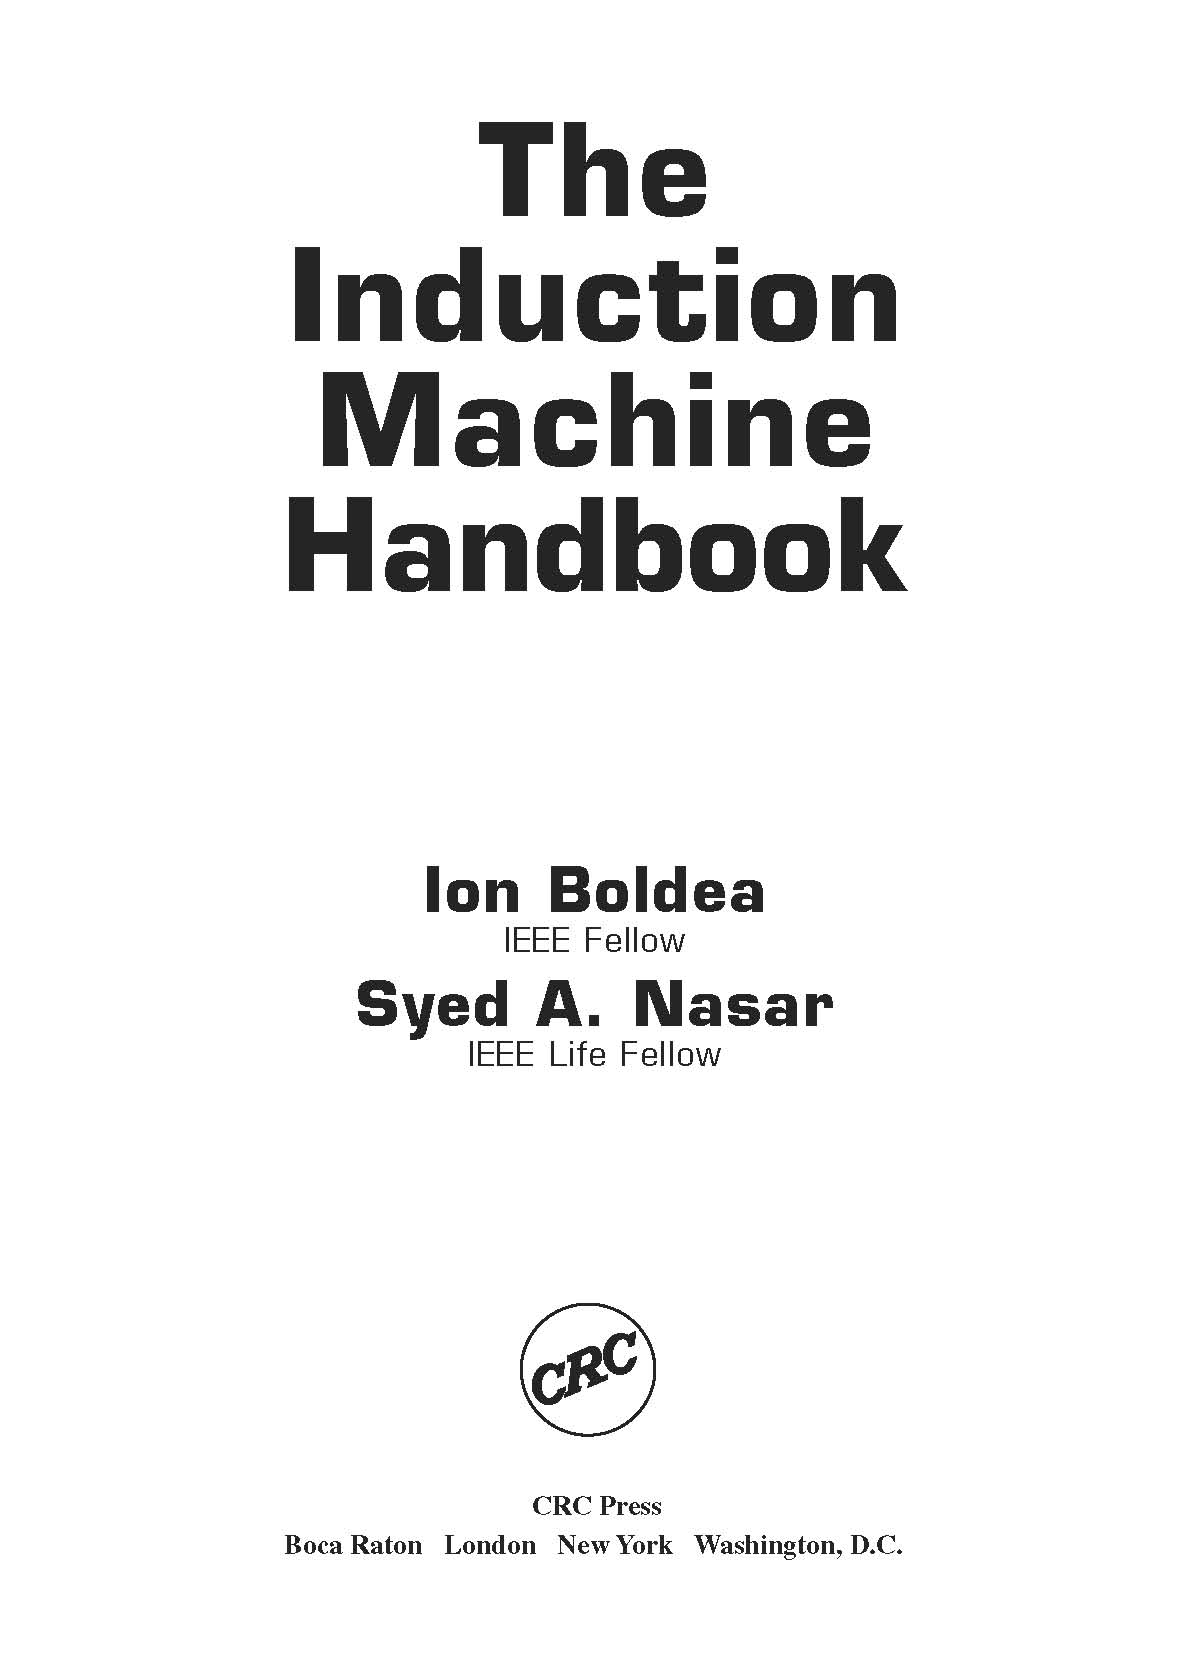 Pages from IM handbook_Page_3.jpg